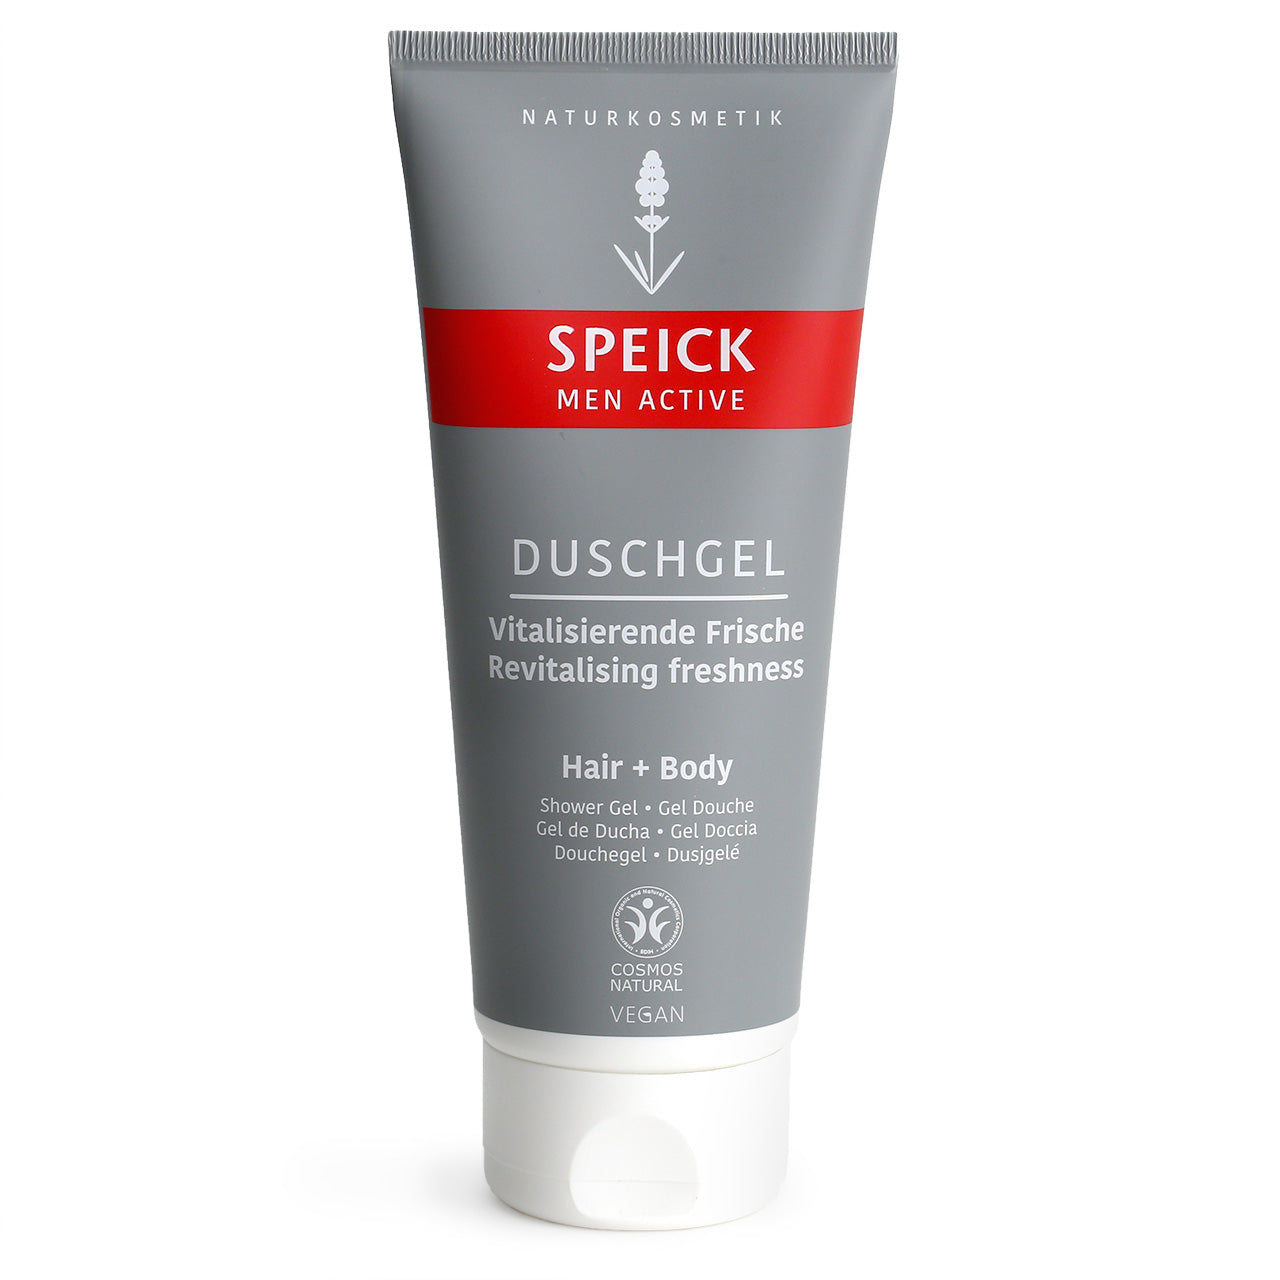 Hair and Body Shower Gel from Speick Men active in a grey tube with red and white logo